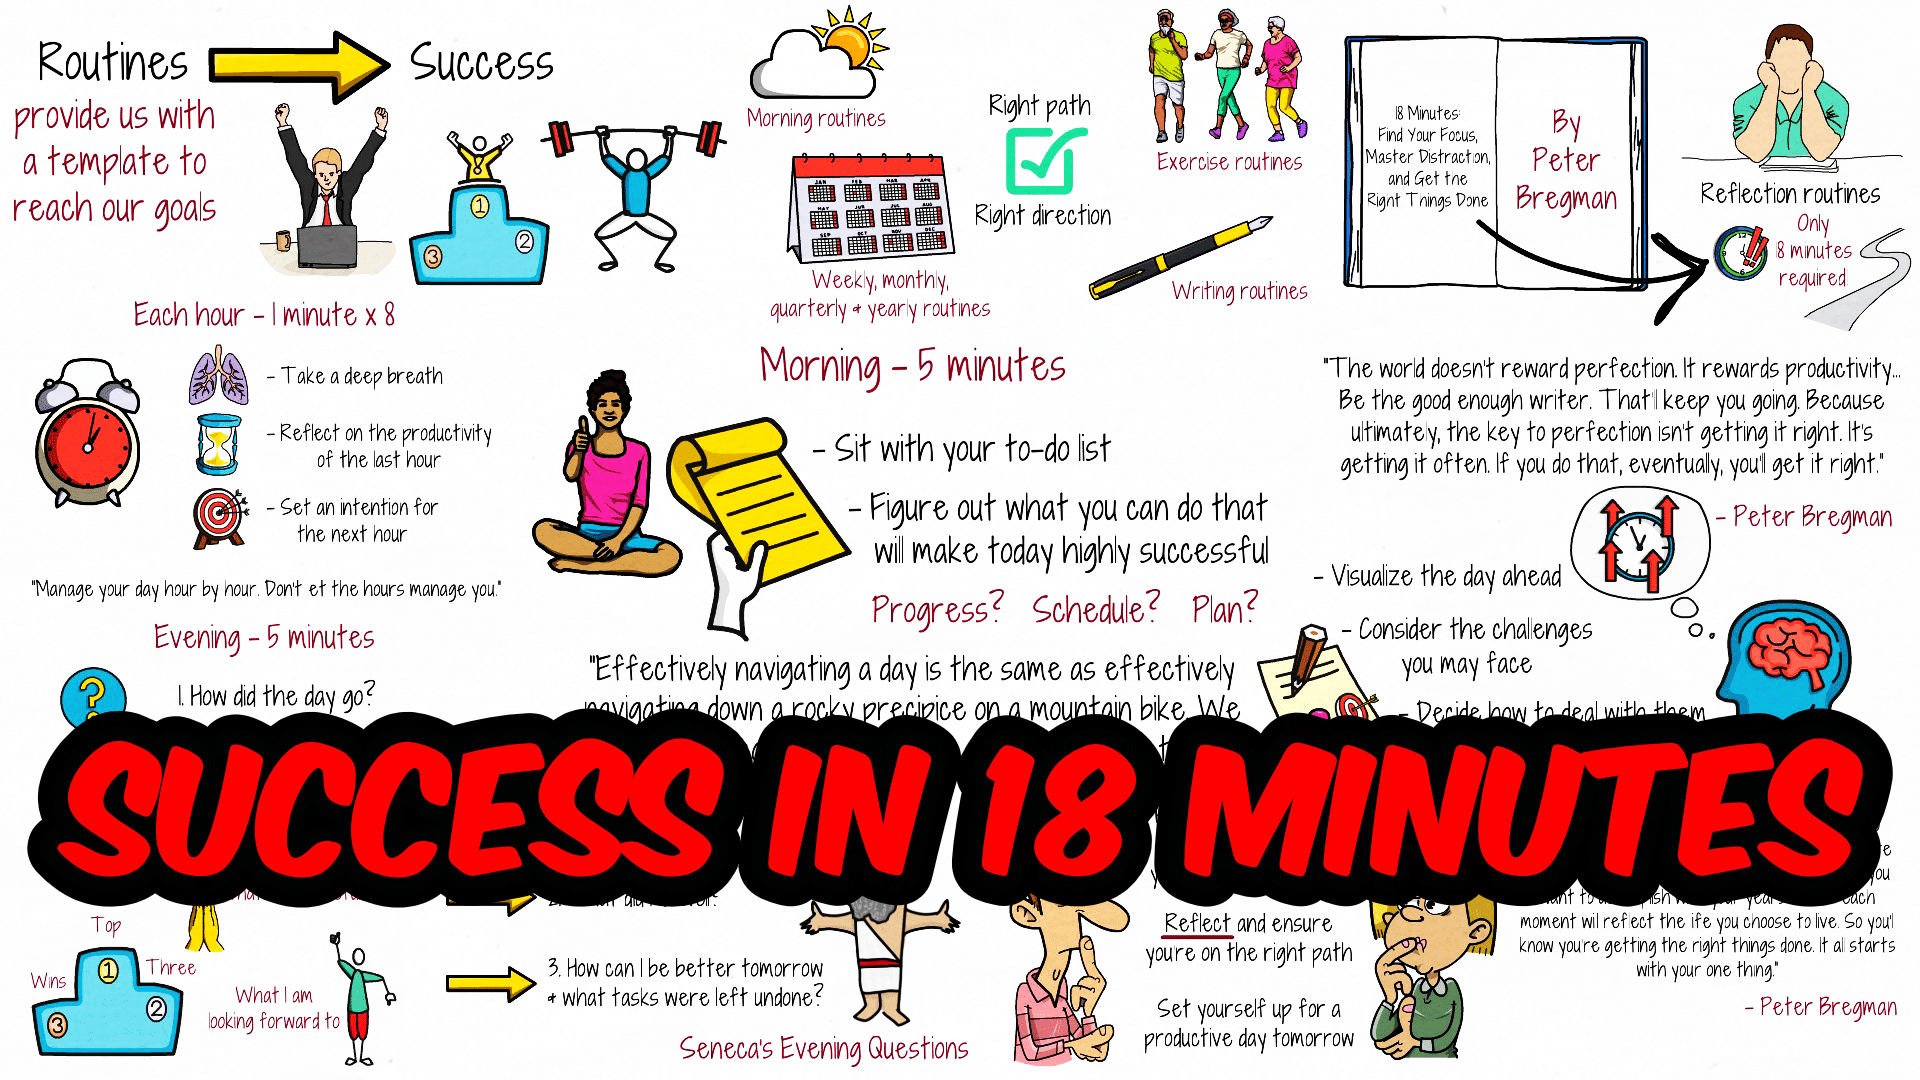 An 18 Minute Routine for Success